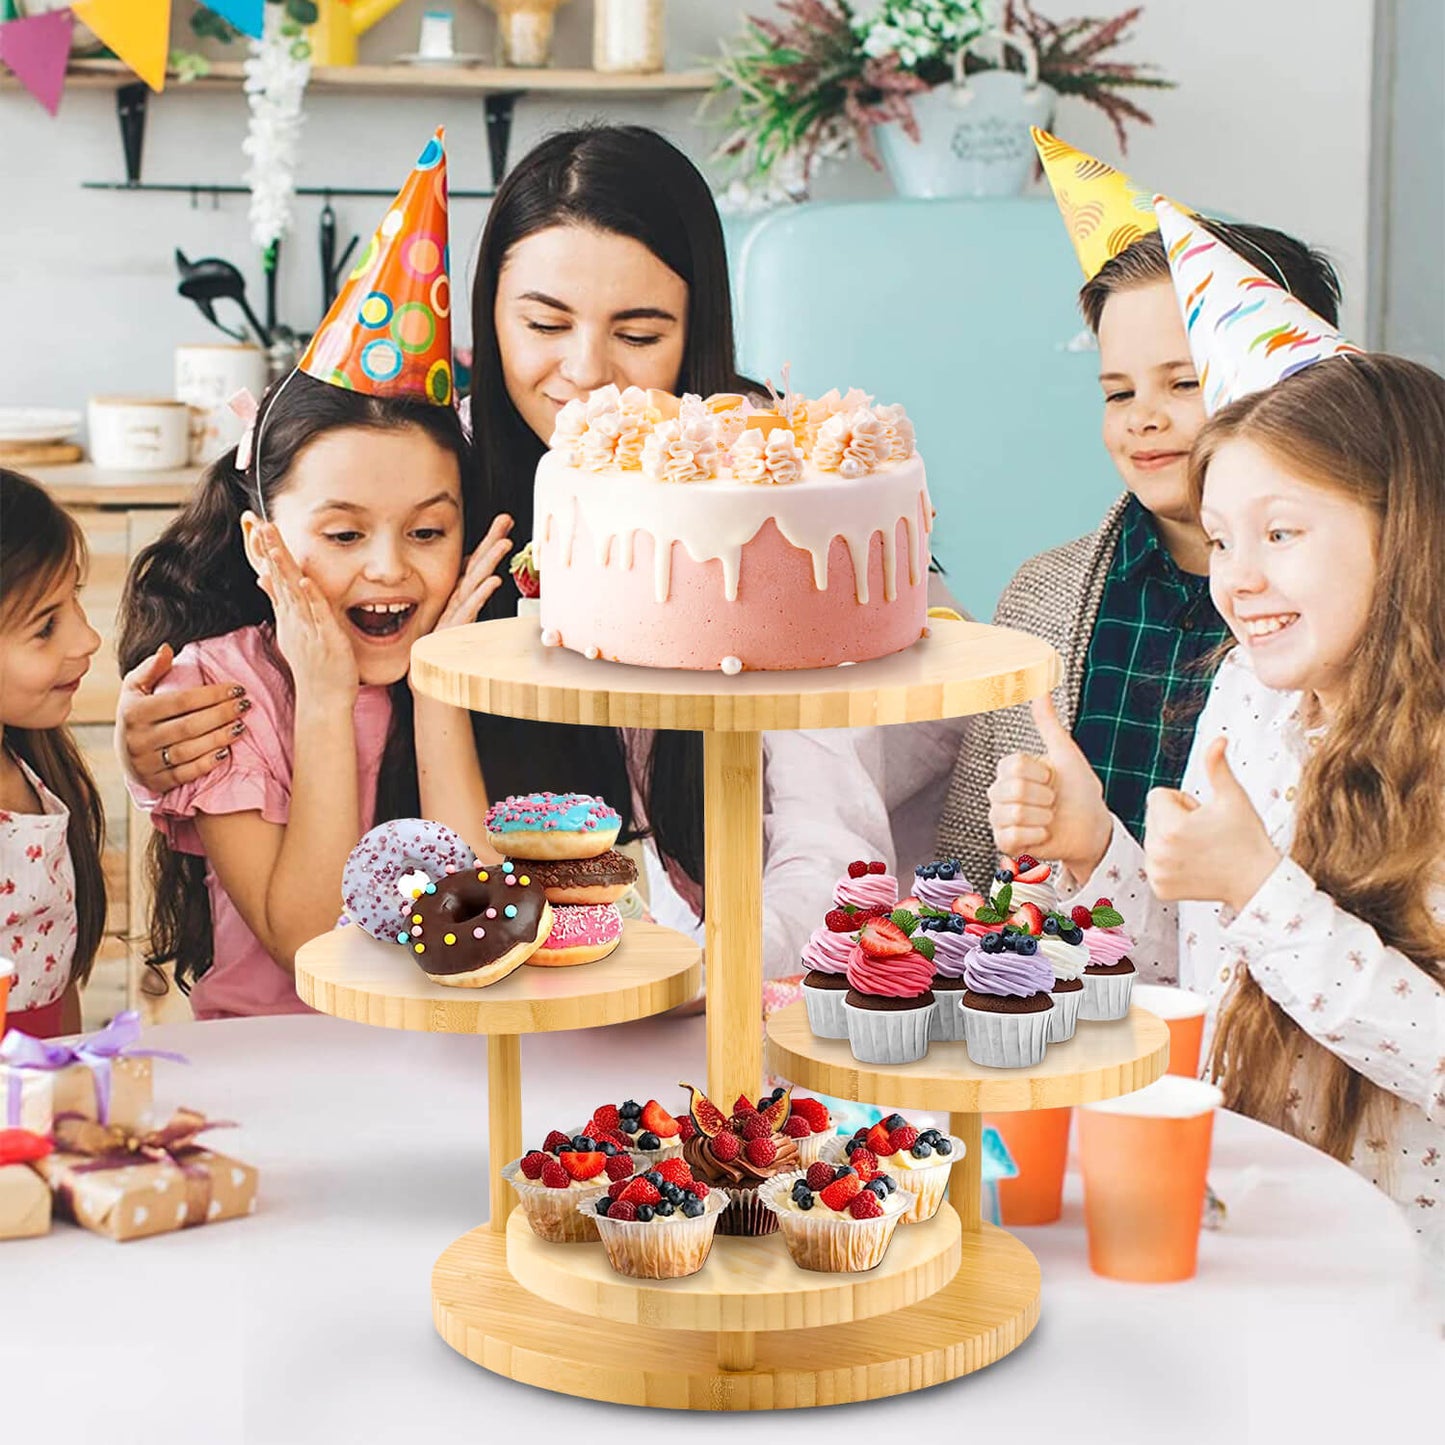 GL-Bamboo Tiered Cake Stand